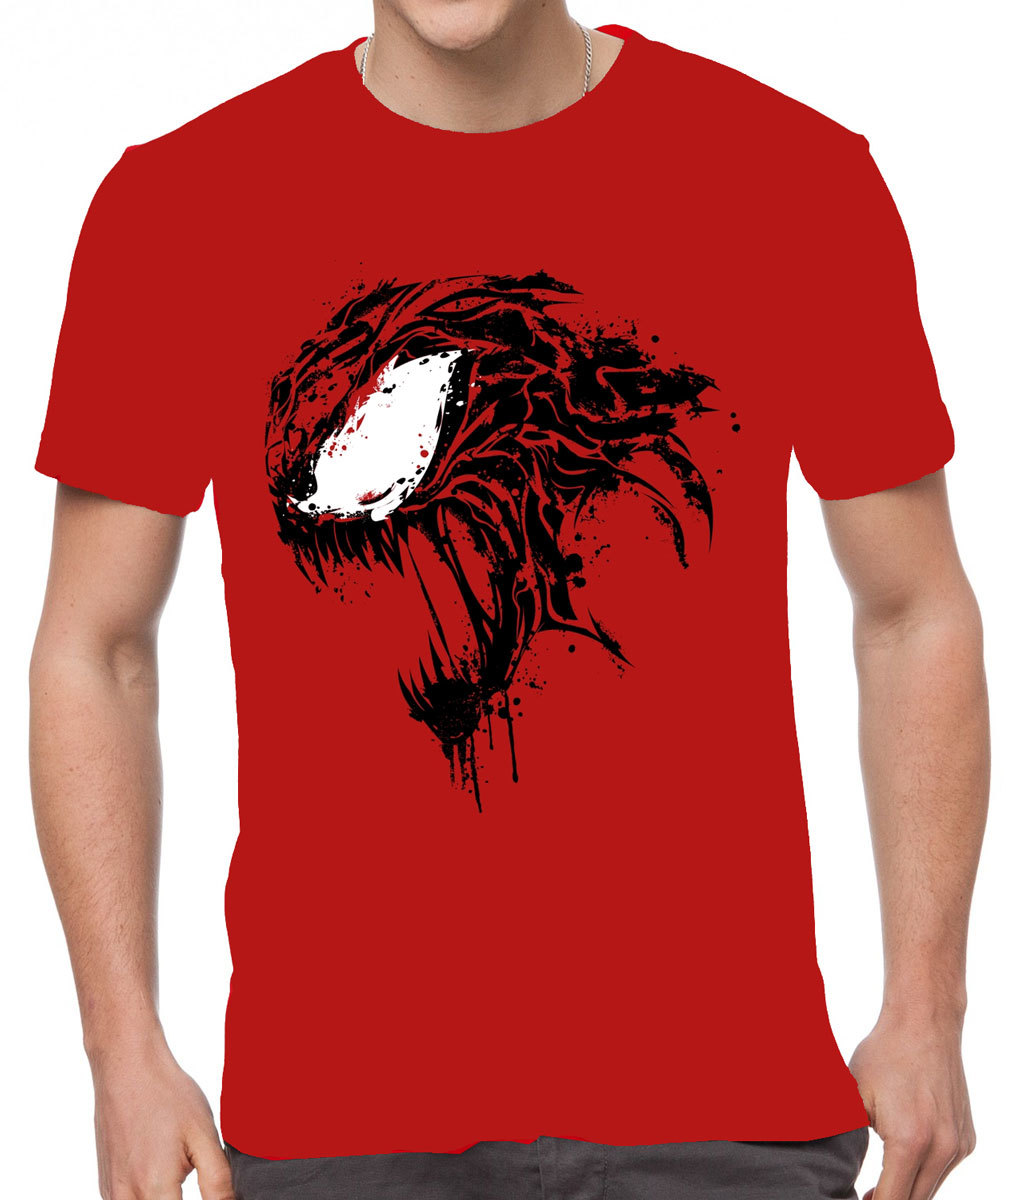 Marvel 'Extreme Carnage' Shirt - Mens T-Shirt - New With Tags - Various ...